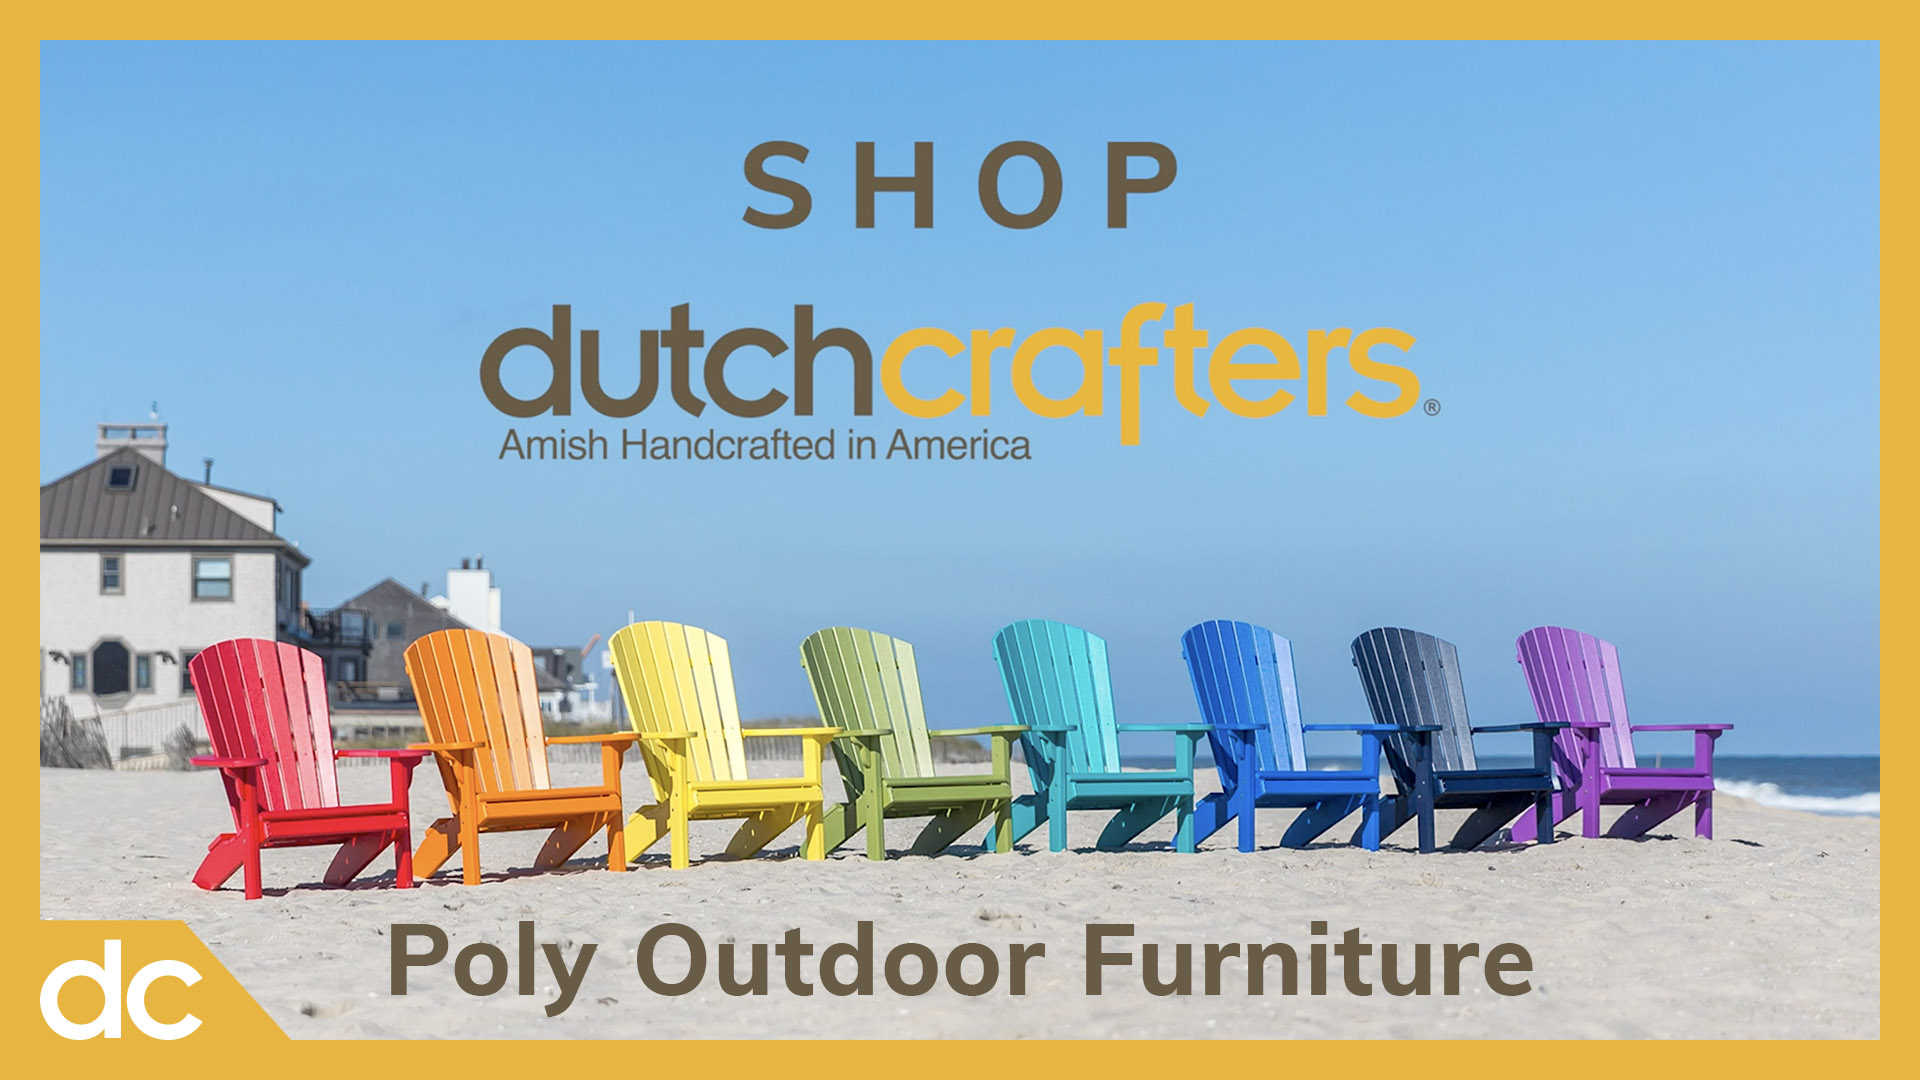 Introduction to Poly Outdoor Furniture Shop DutchCrafters